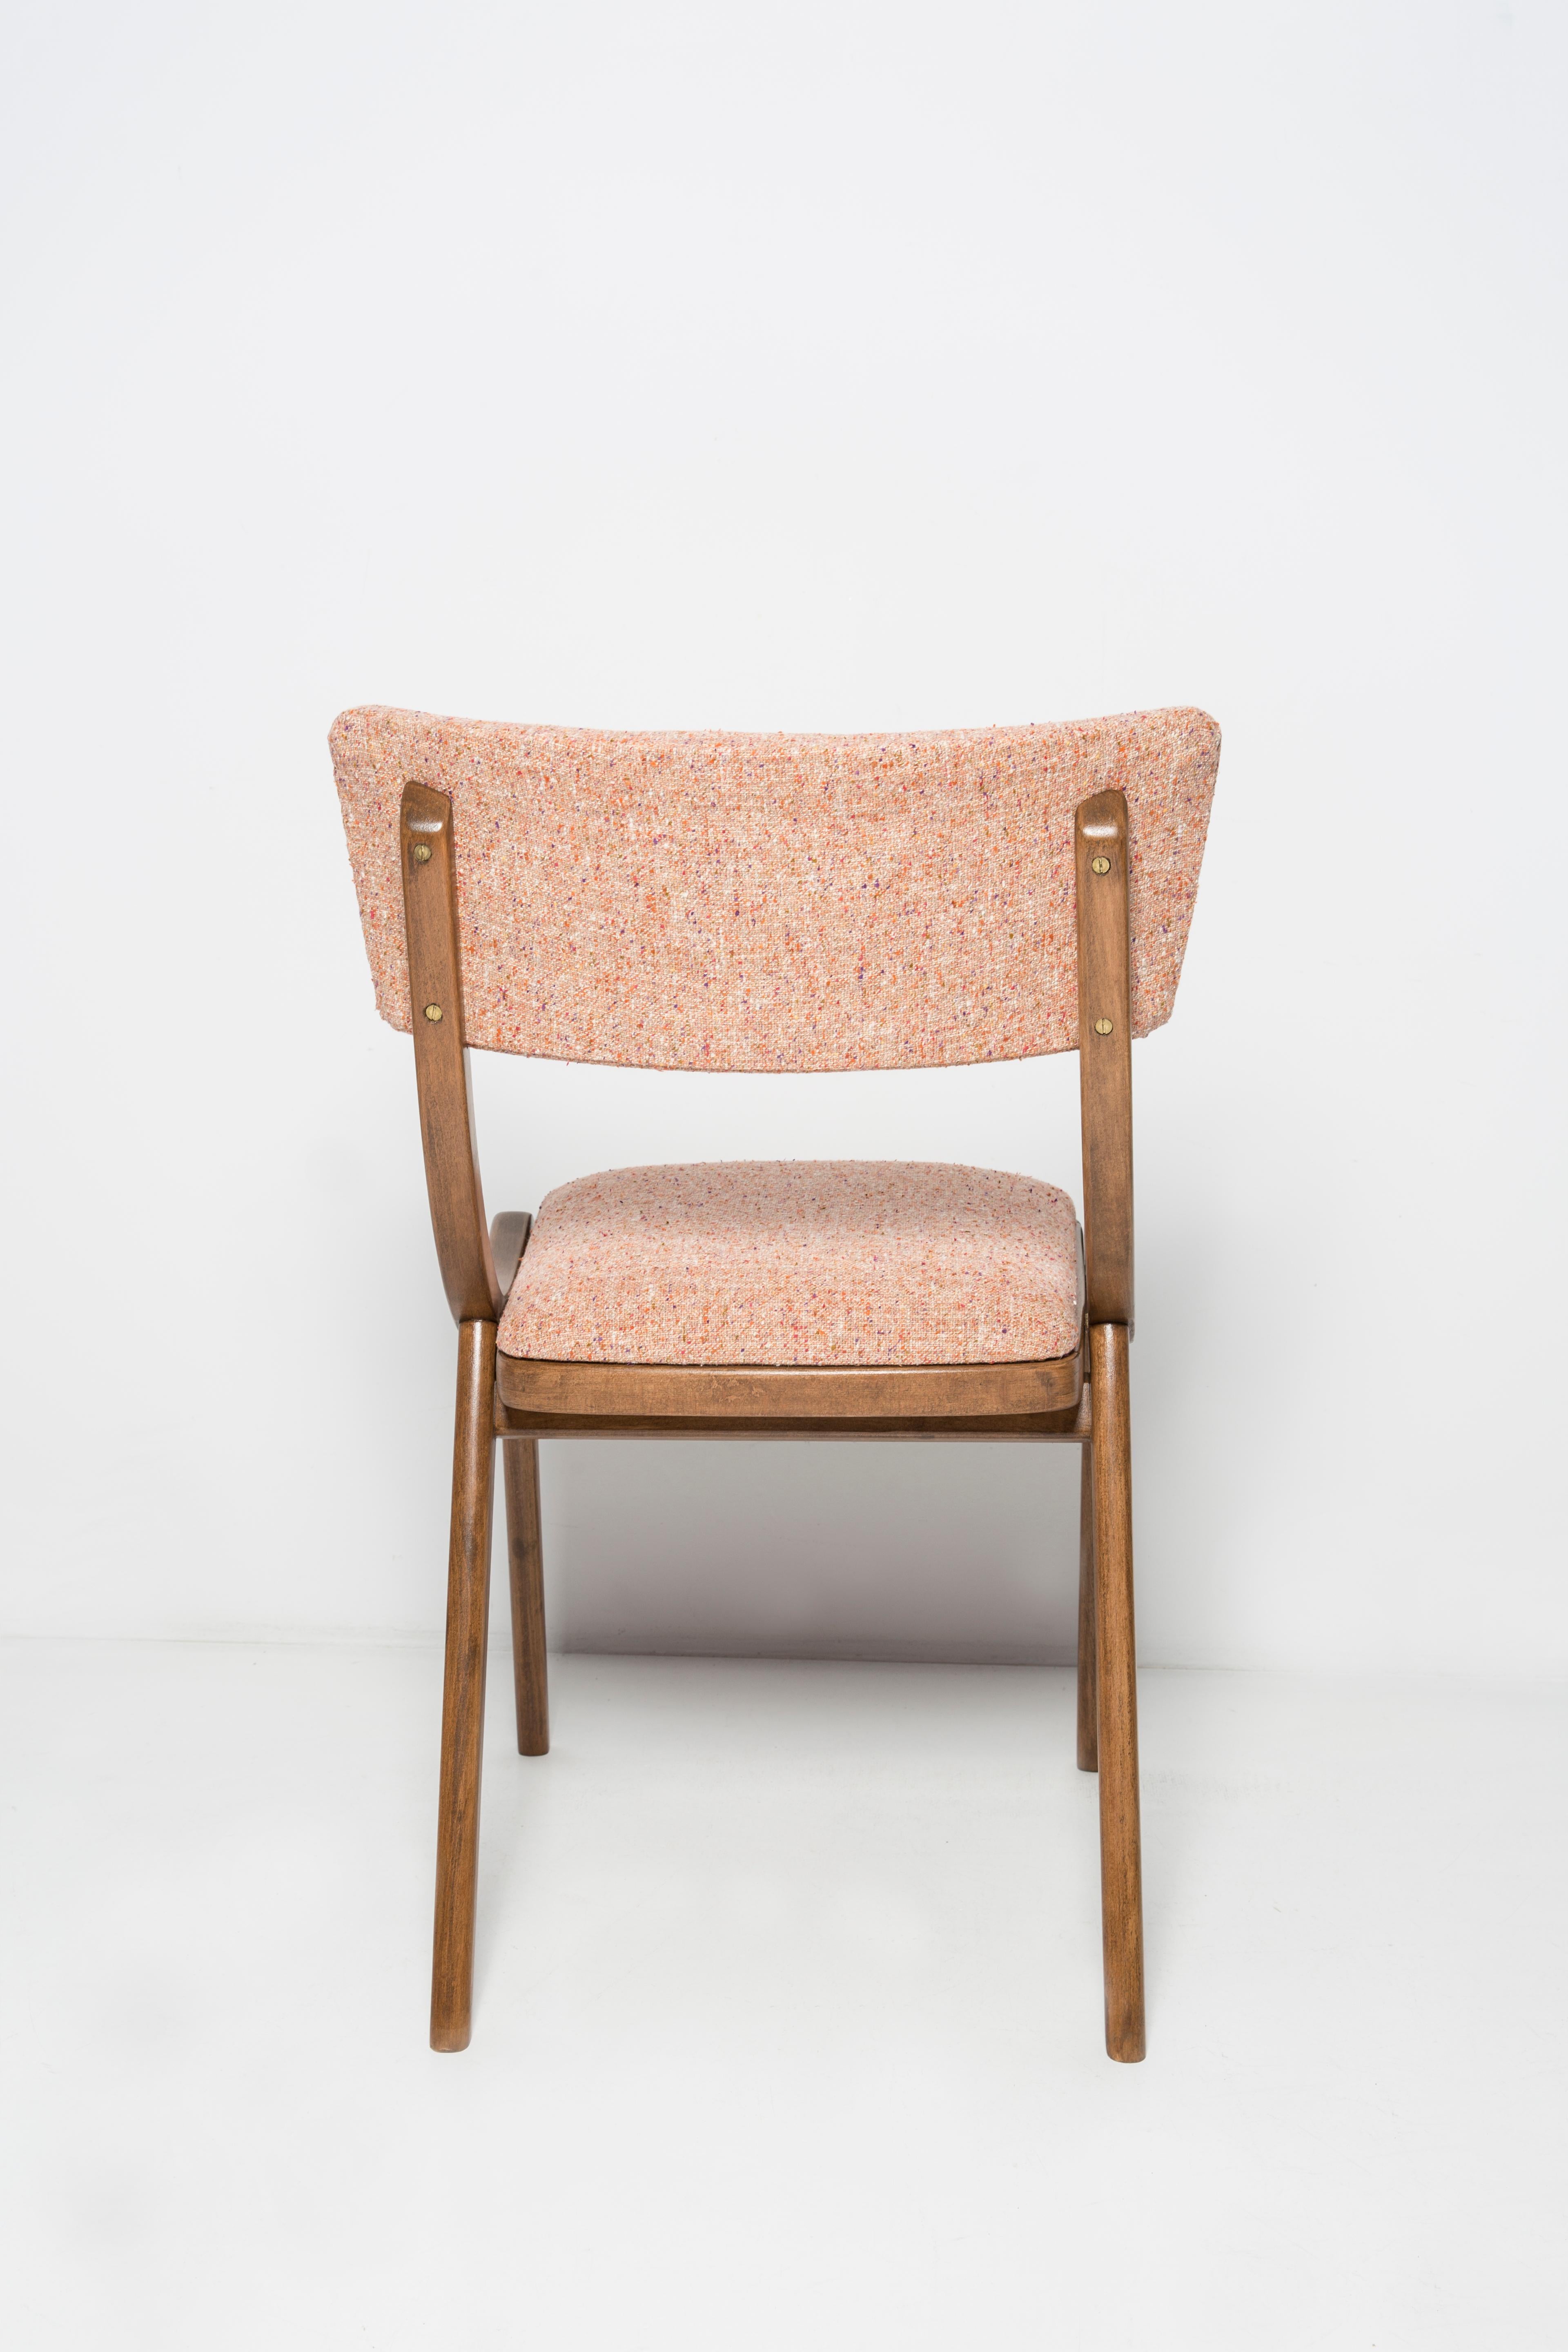 Hand-Crafted Set of Four Mid Century Modern Bumerang Chairs, Peach Orange Wool, Poland, 1960s For Sale